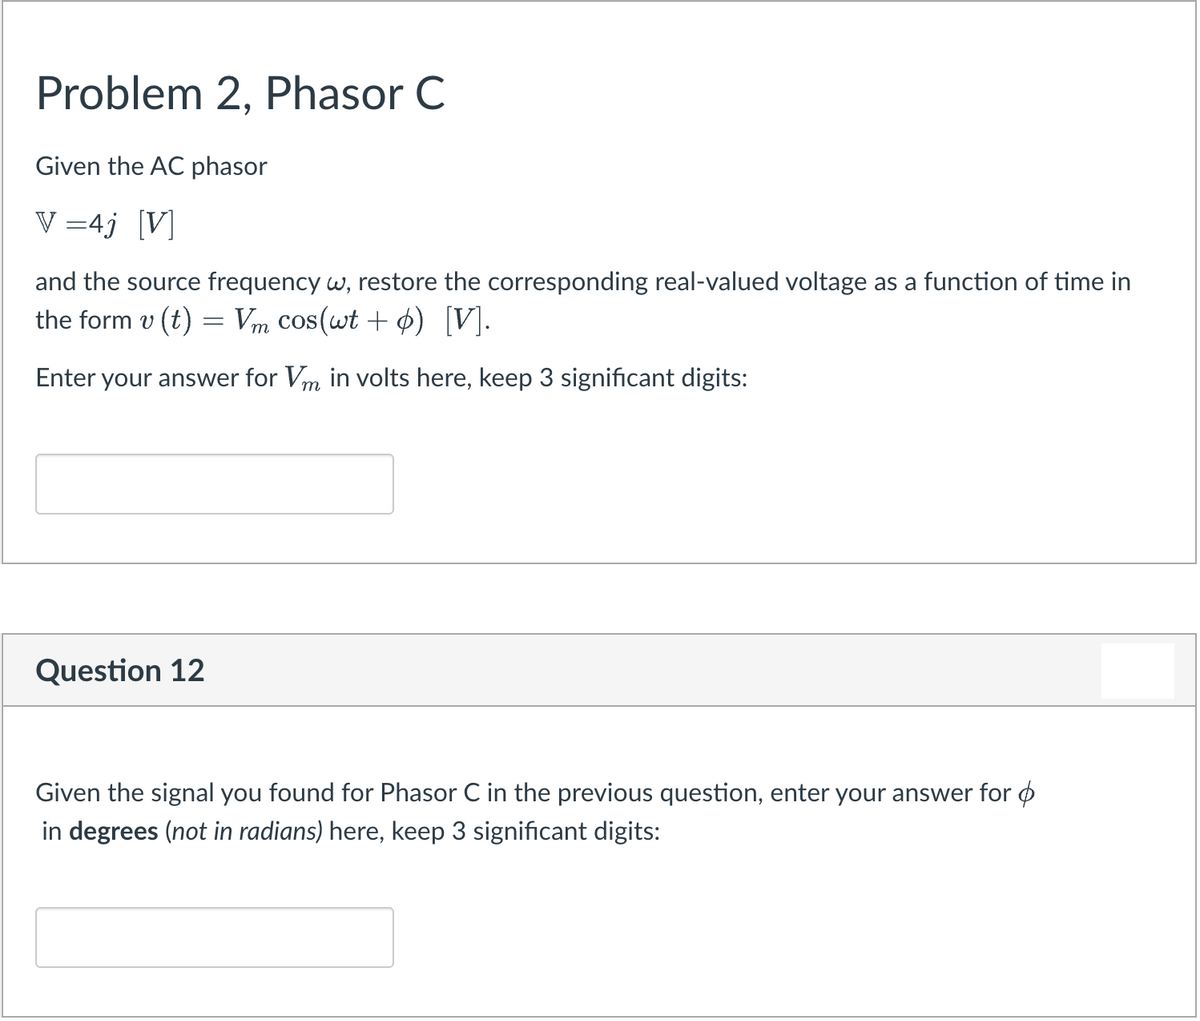 Problem 2, Phasor C
Given the AC phasor
V =4j [V]
and the source frequency w, restore the corresponding real-valued voltage as a function of time in
the form v (t) = Vm cos(wt + 4) [V].
Enter your answer for Vm in volts here, keep 3 significant digits:
Question 12
Given the signal you found for Phasor C in the previous question, enter your answer for ø
in degrees (not in radians) here, keep 3 significant digits:
